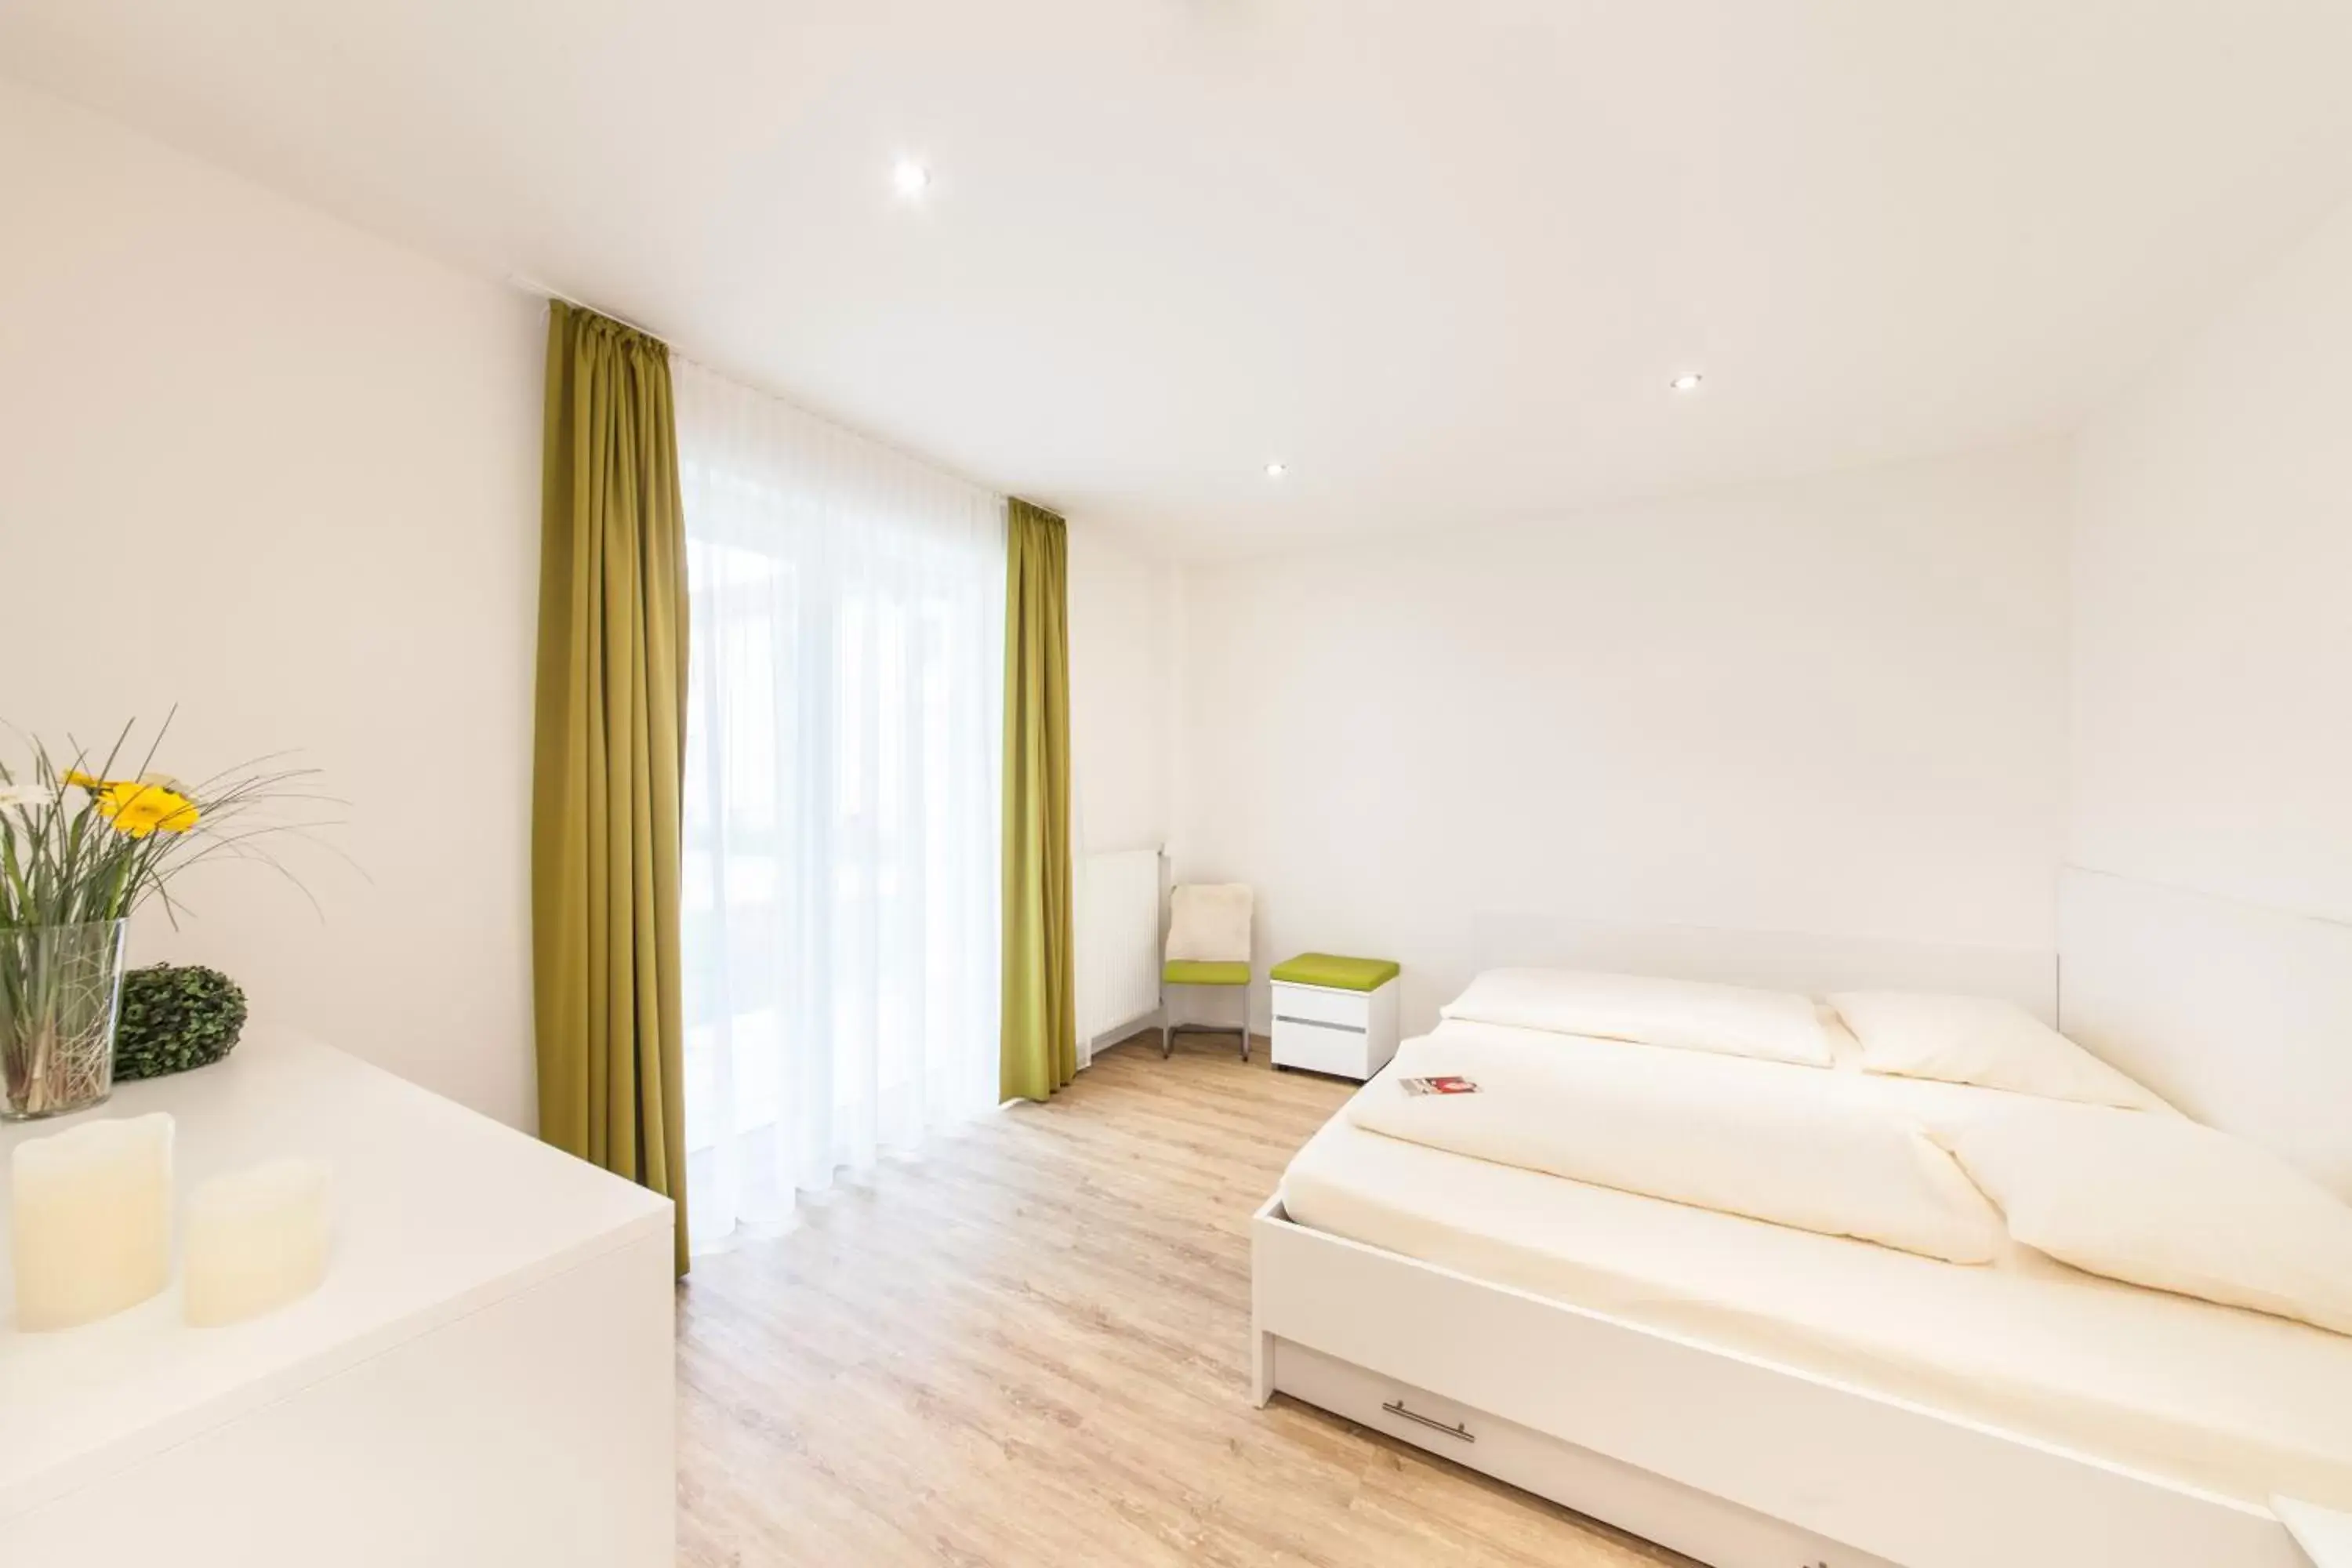 Bed, Room Photo in acora Fürth Living the City